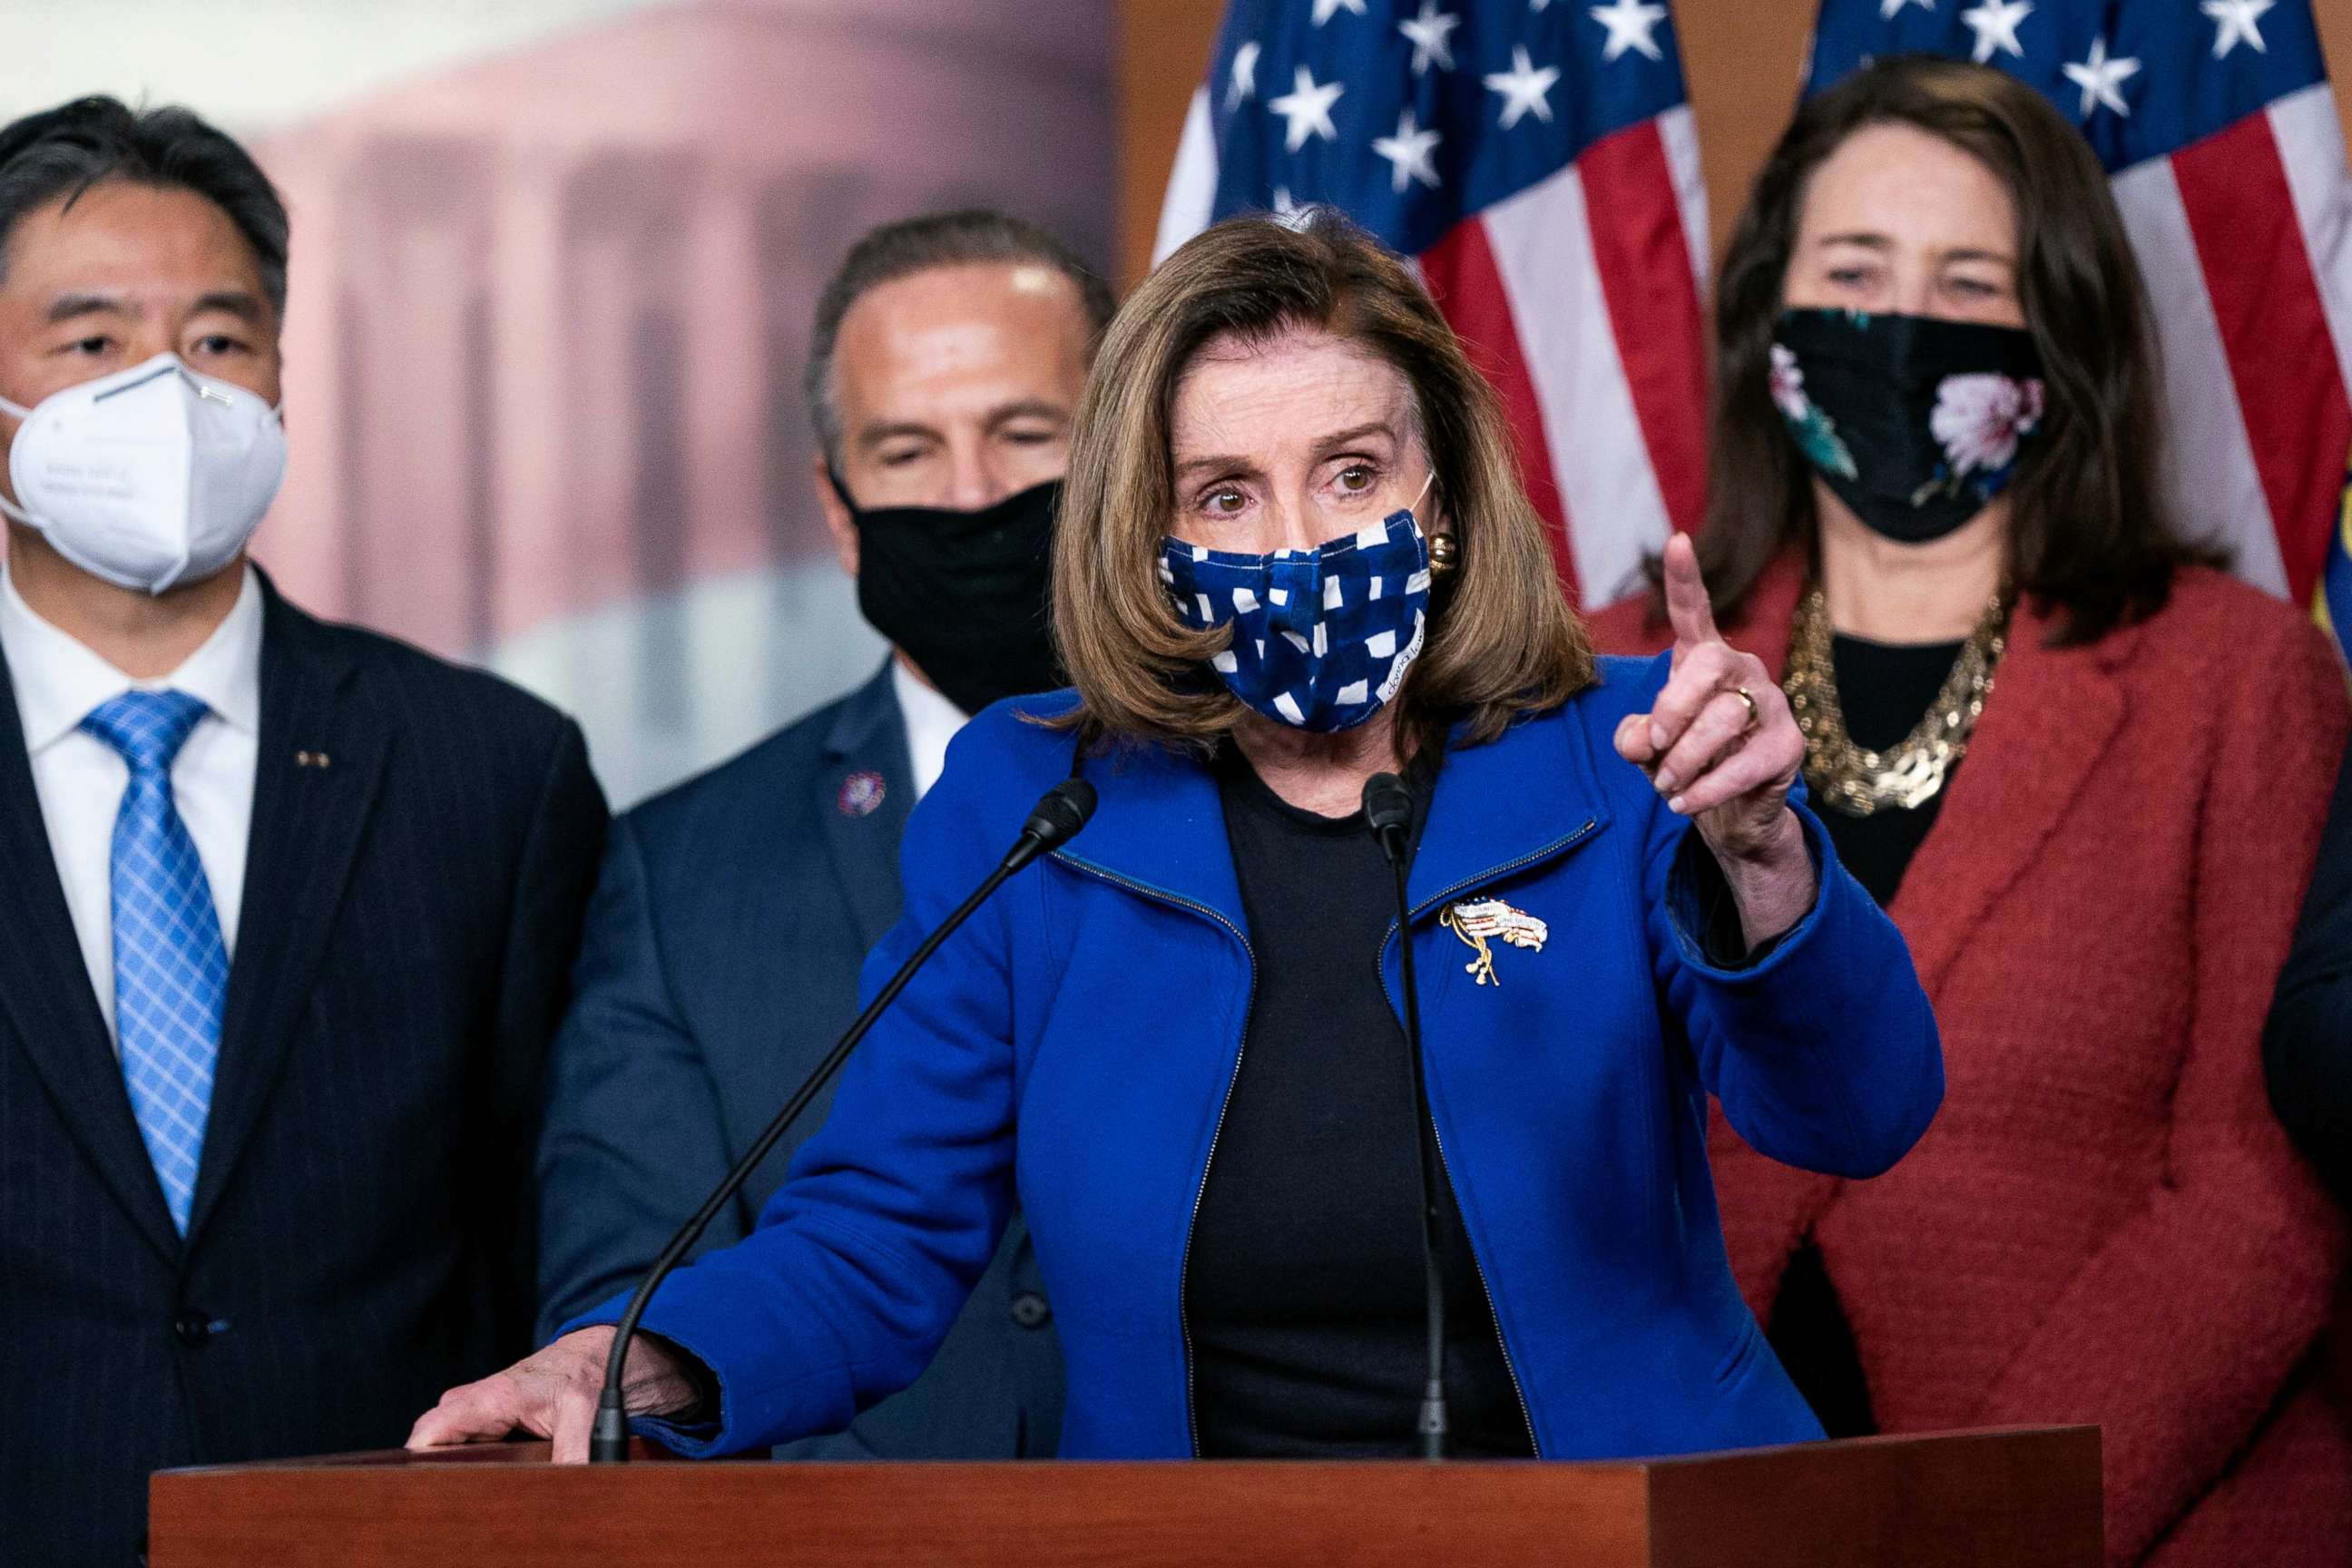 PHOTO: Speaker of the House Nancy Pelosi, with House impeachment managers, speaks to the press after the Senate voted to acquit former President Donald Trump, Feb. 13, 2021, in Washington, DC.